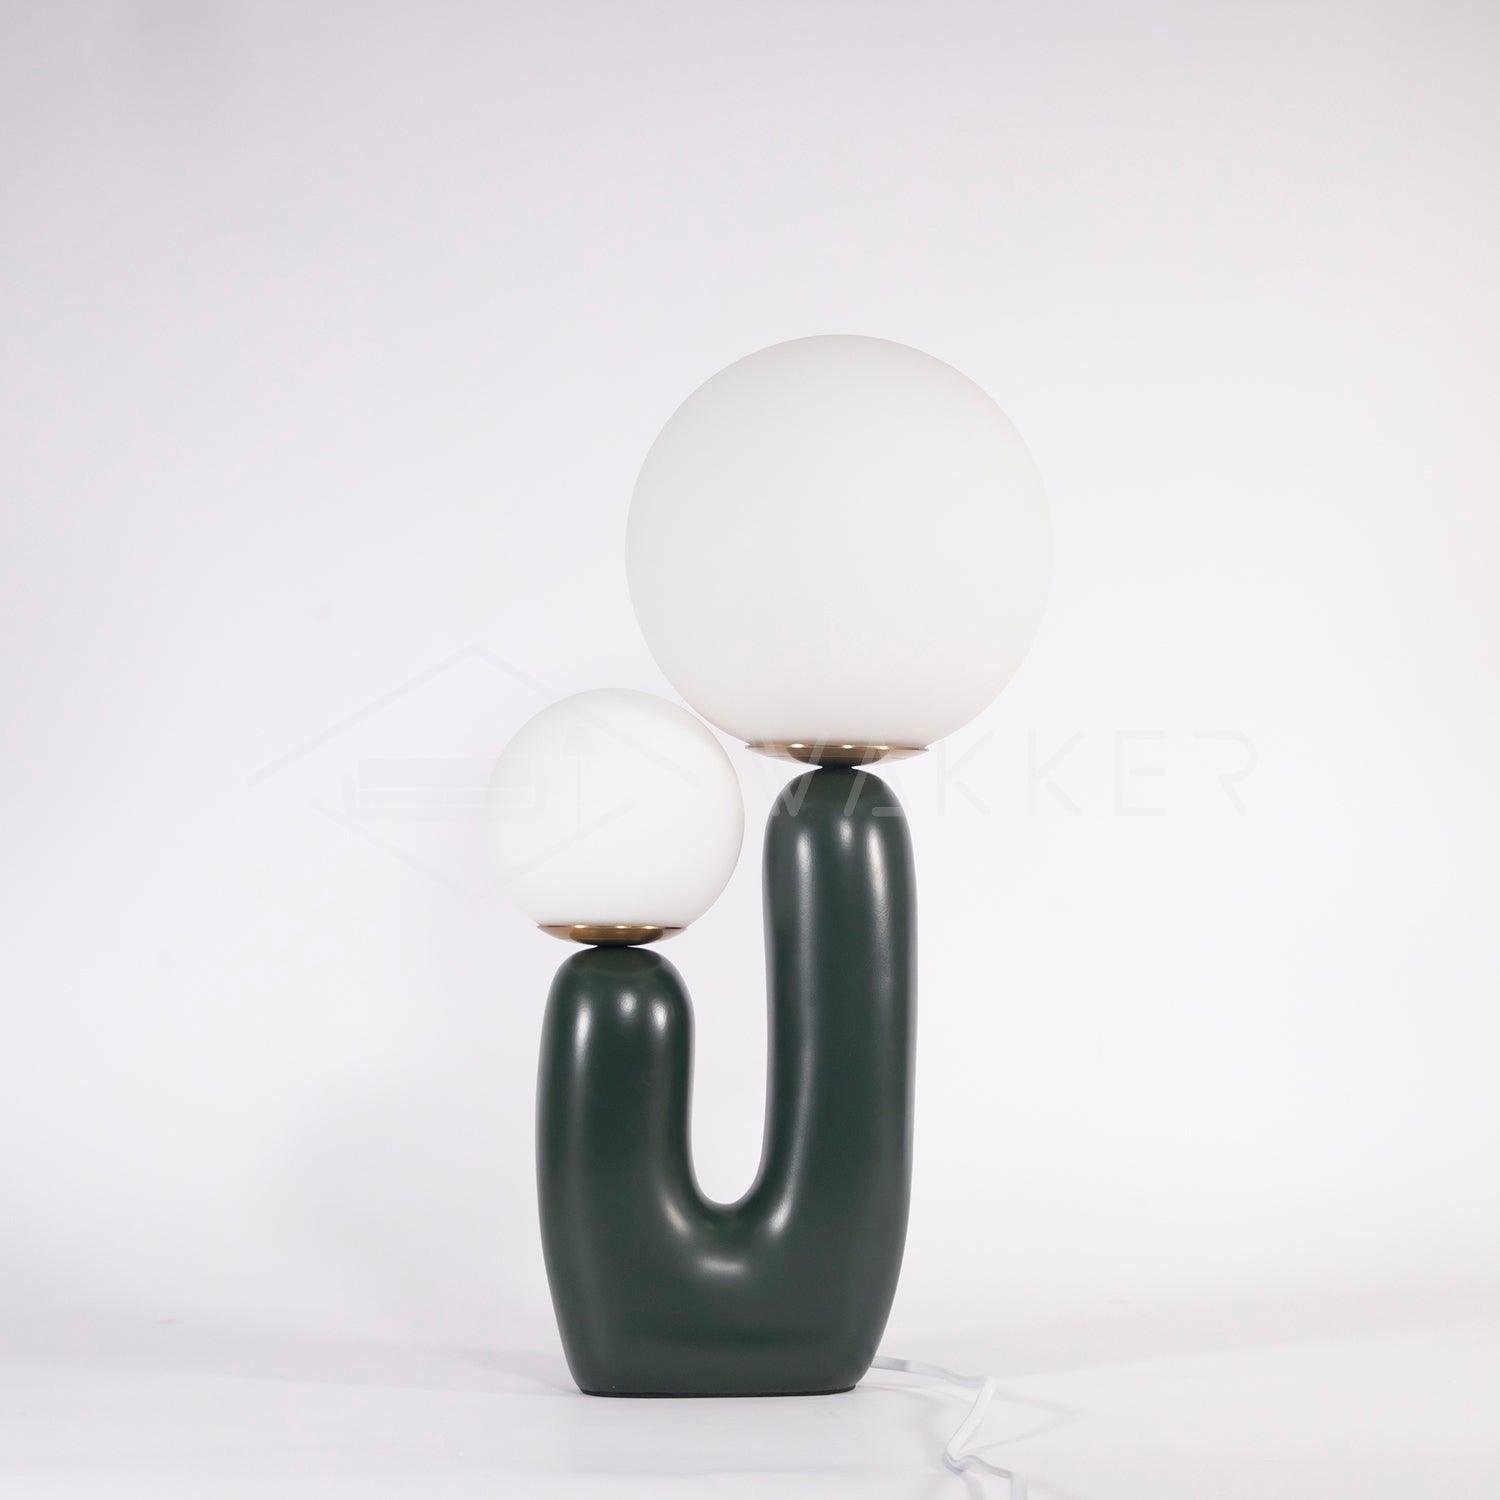 Smooth Table Lamp in Oo design, measuring 10.2" in diameter and 16.5" in height (or 26cm x 42cm), featuring a vibrant green color and compatible with UK plug.